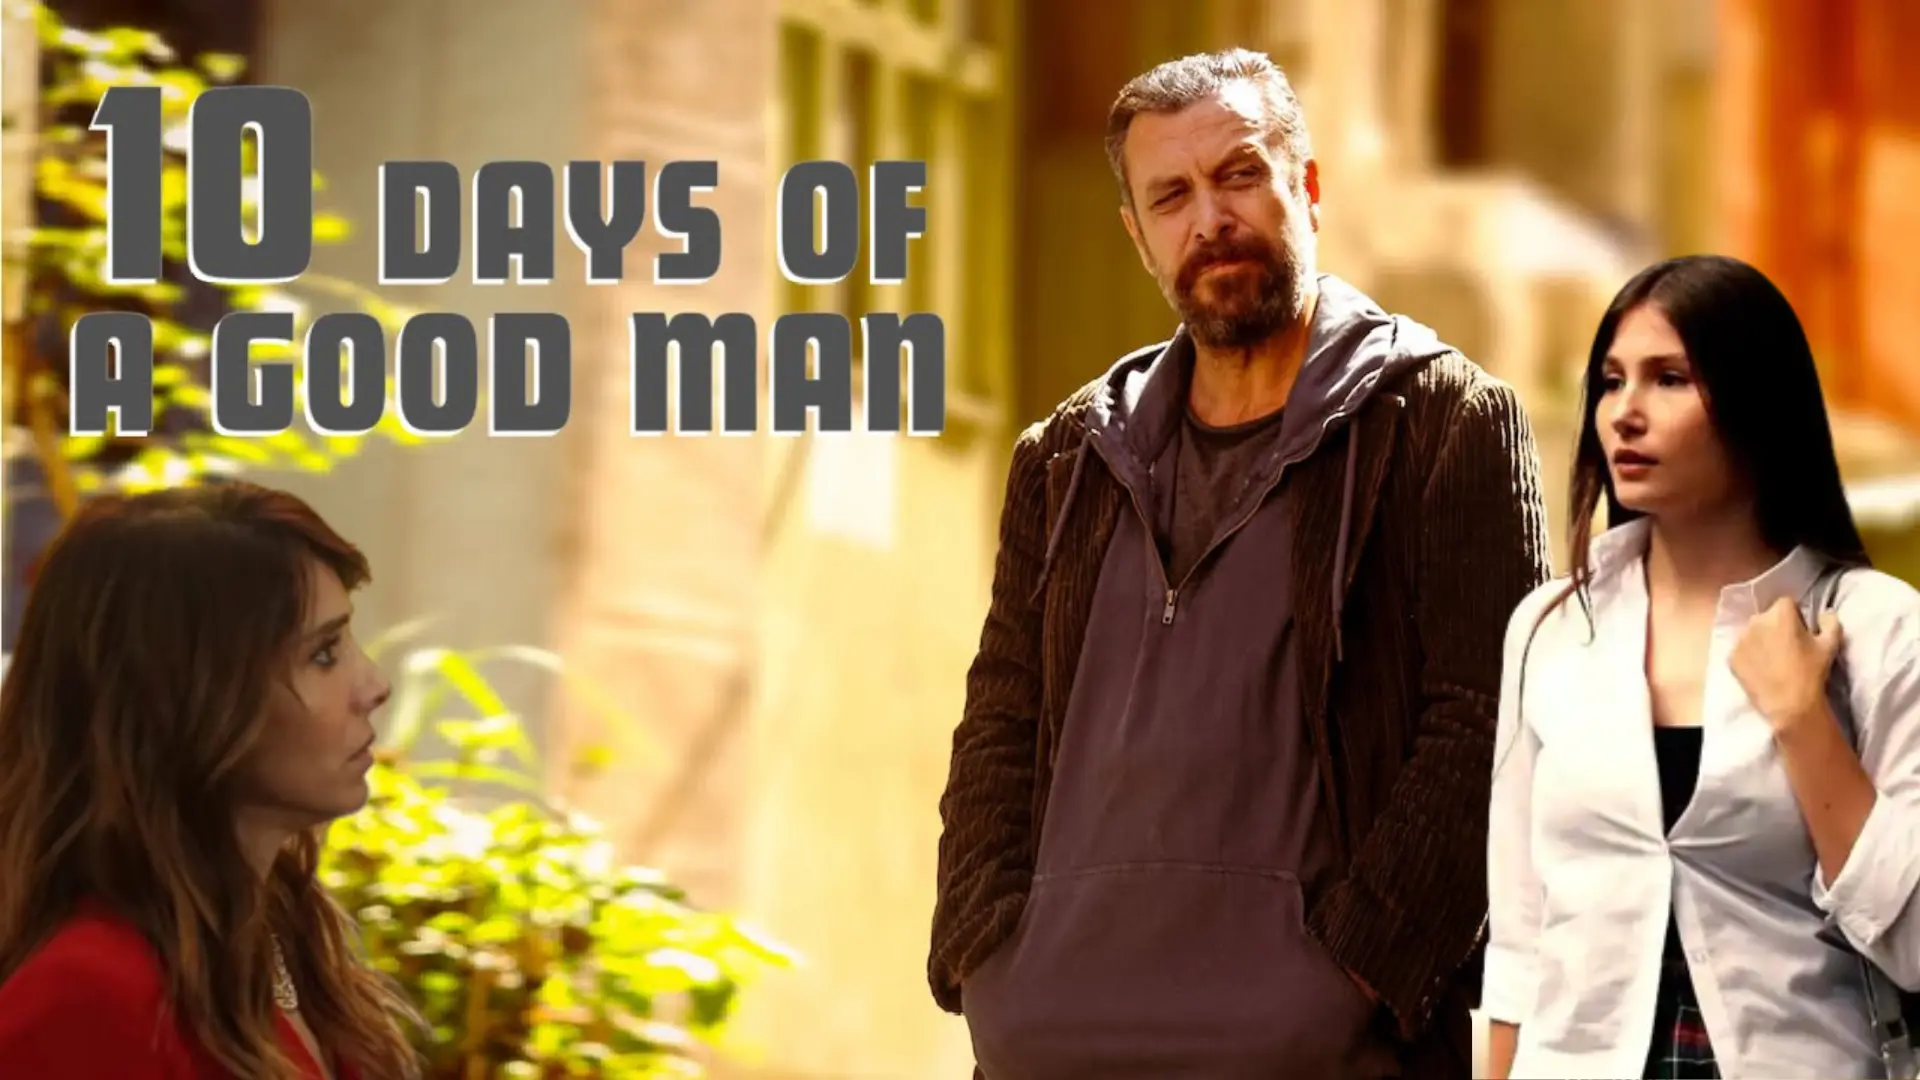 10 Days of a Good Man Part 2: Will There Be a Sequel?